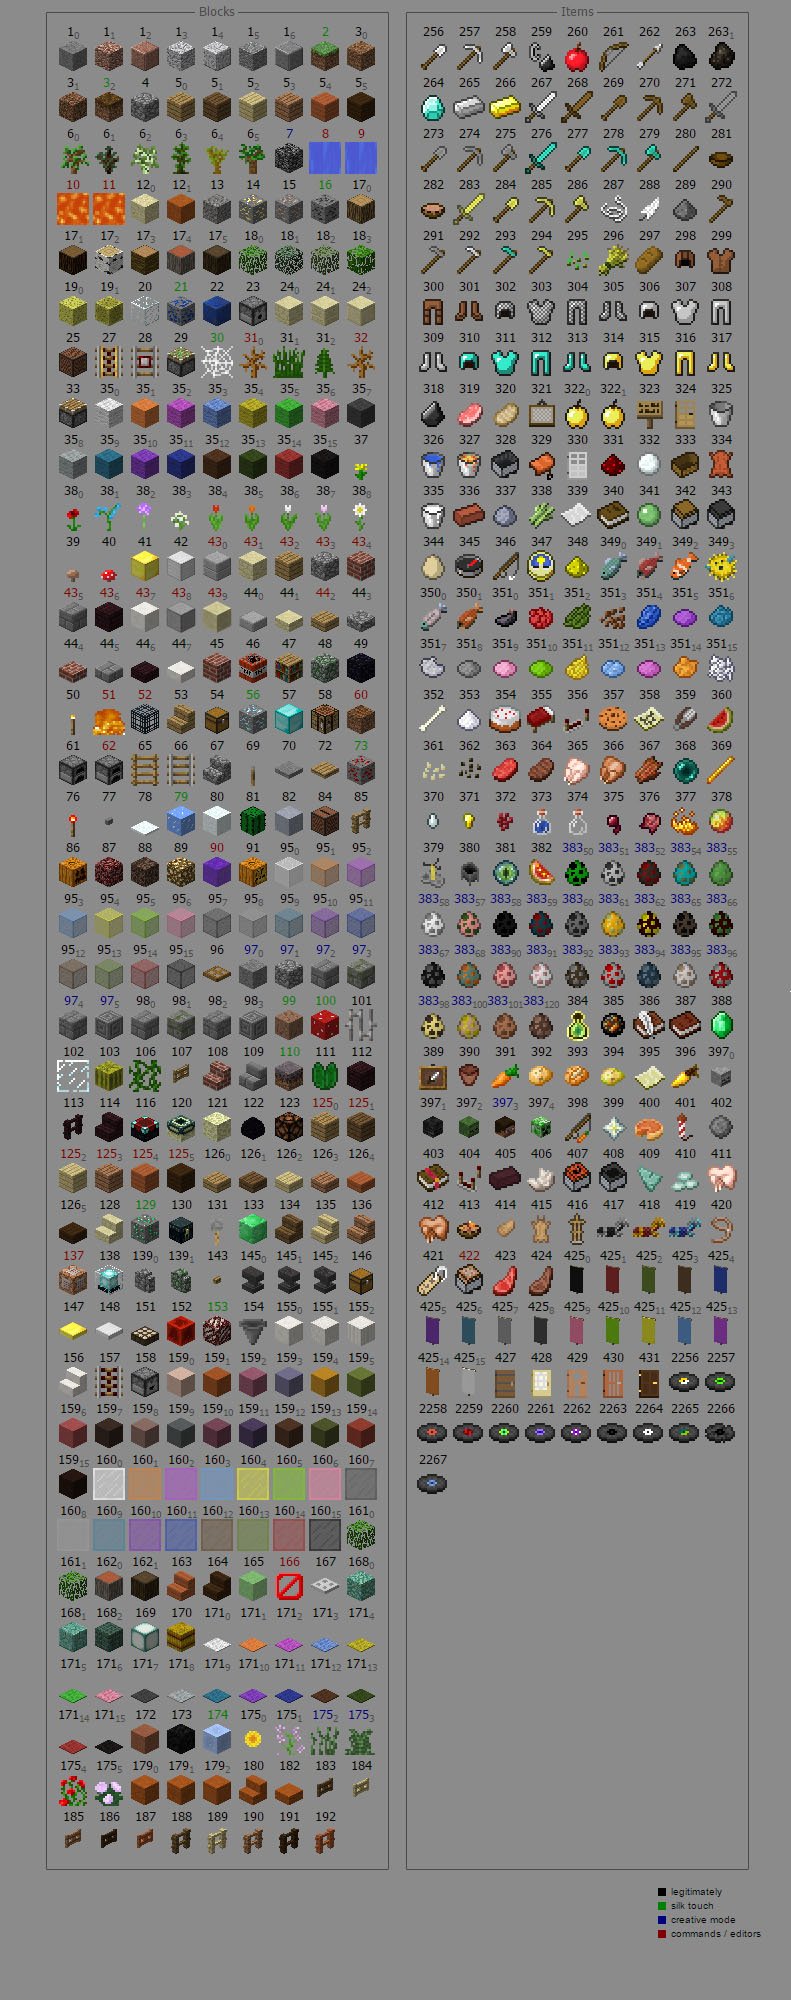 ID items and blocks in Minecraft